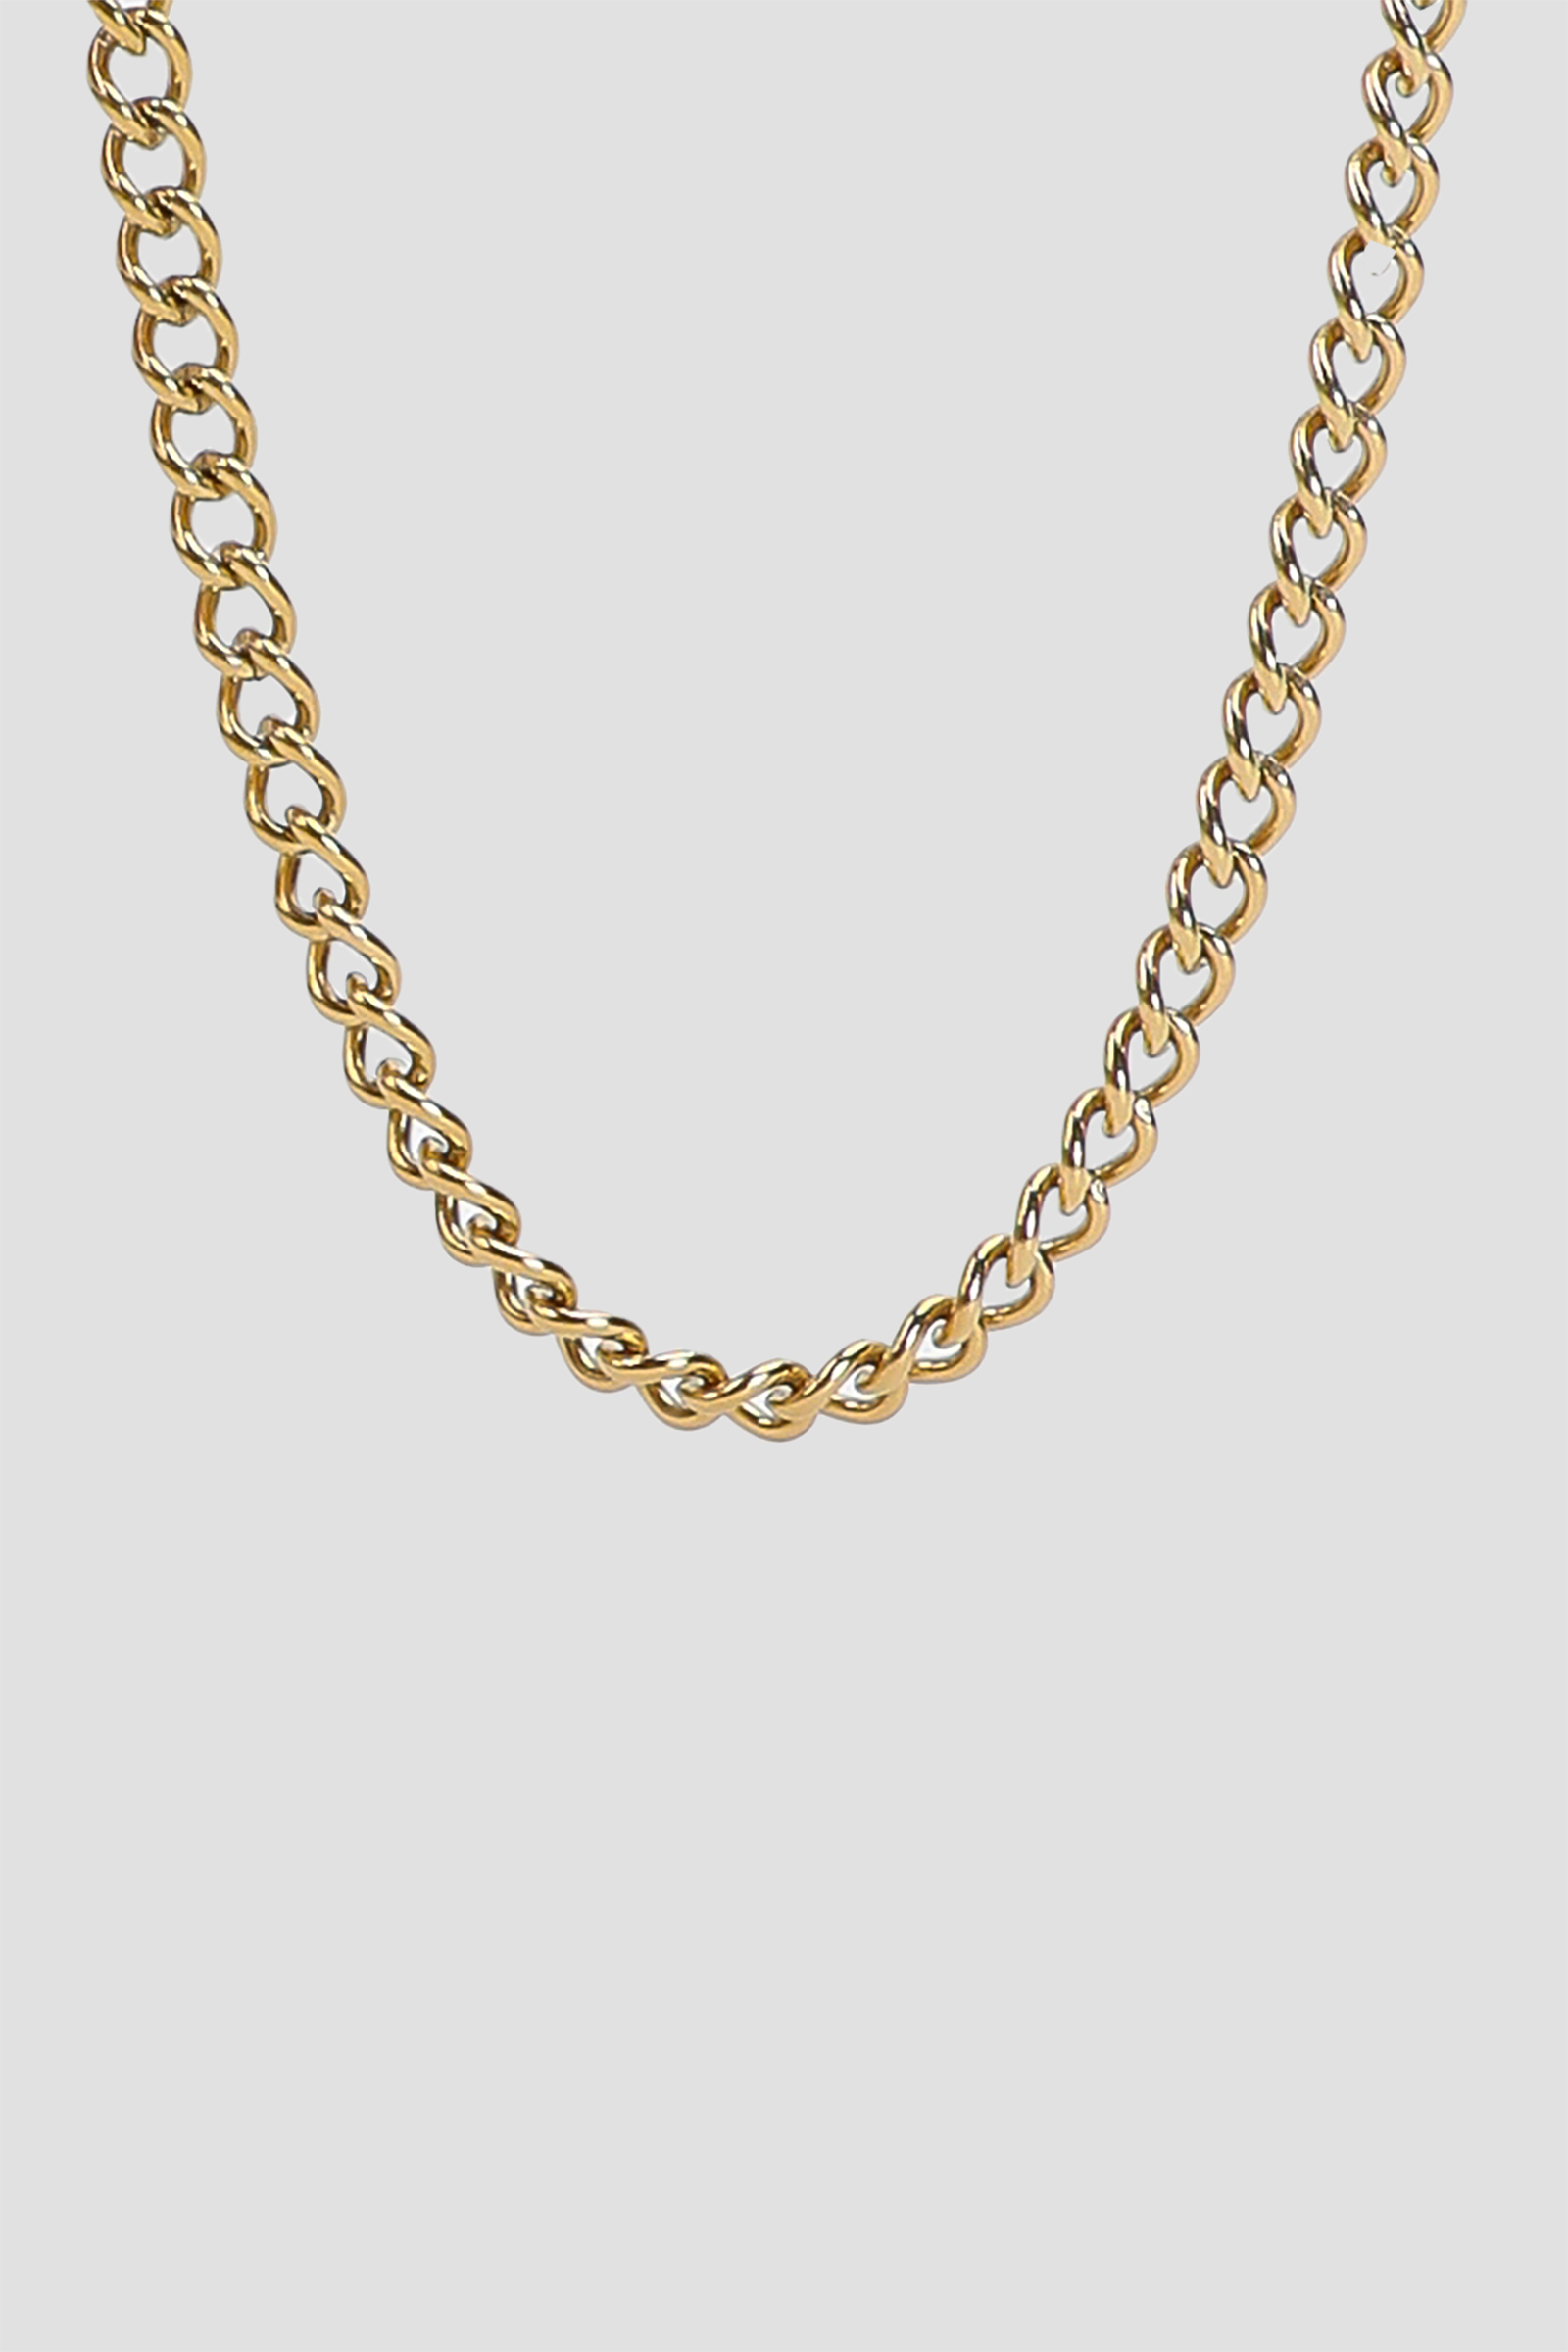 Ardene Man 14K Gold Plated Cuban Link Chain Necklace For Men | Stainless Steel